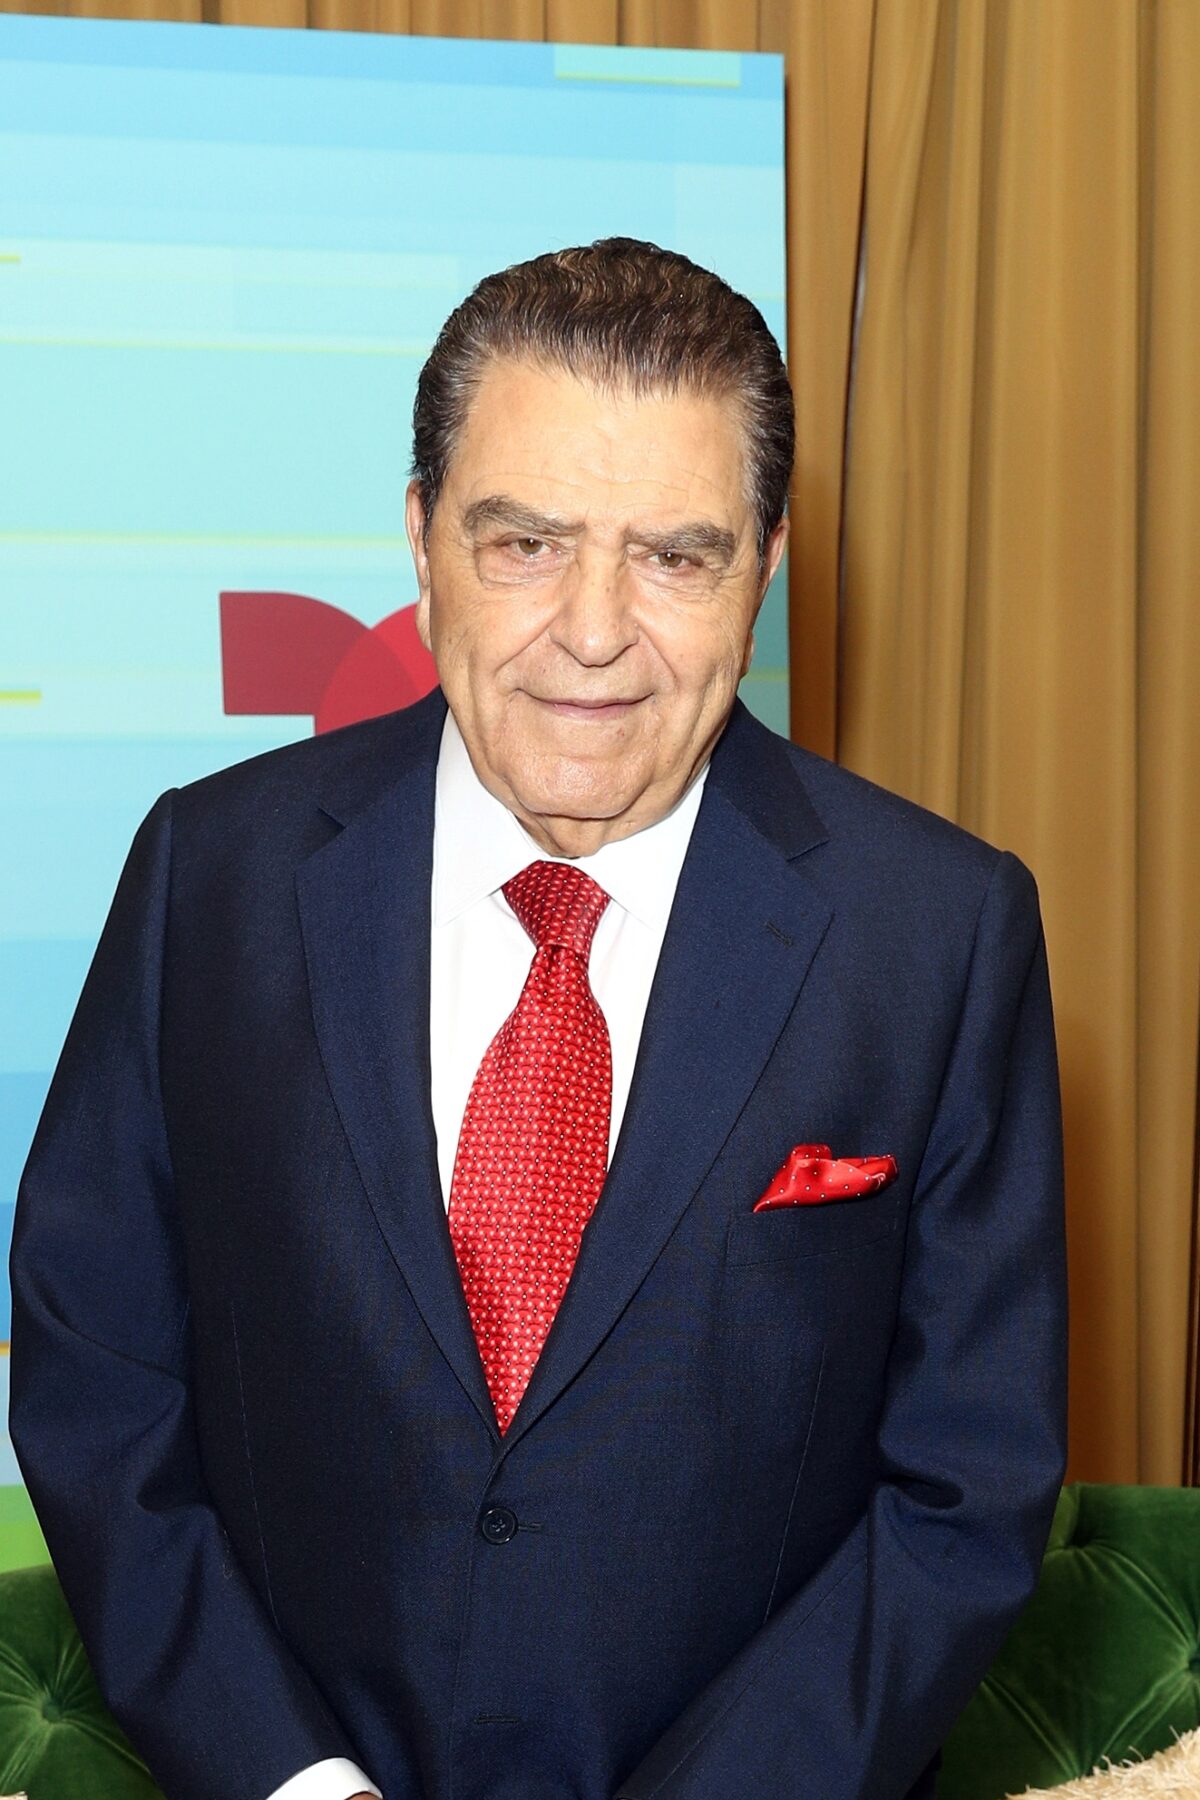 HOLLYWOOD, CA - OCTOBER 25: Don Francisco poses in the press room during the 2018 Latin American Music Awards at Dolby Theatre on October 25, 2018 in Hollywood, California. (Photo by Frederick M. Brown/Getty Images)